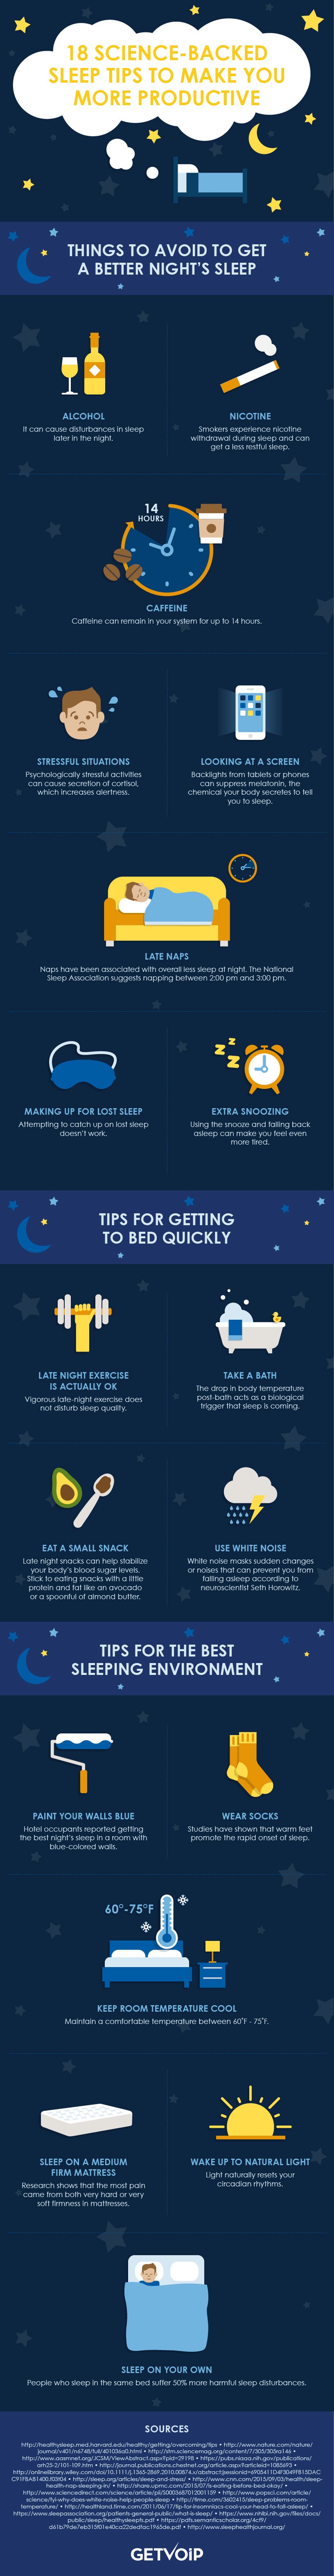 18 Science-Backed Sleep Tips to Make You More Productive